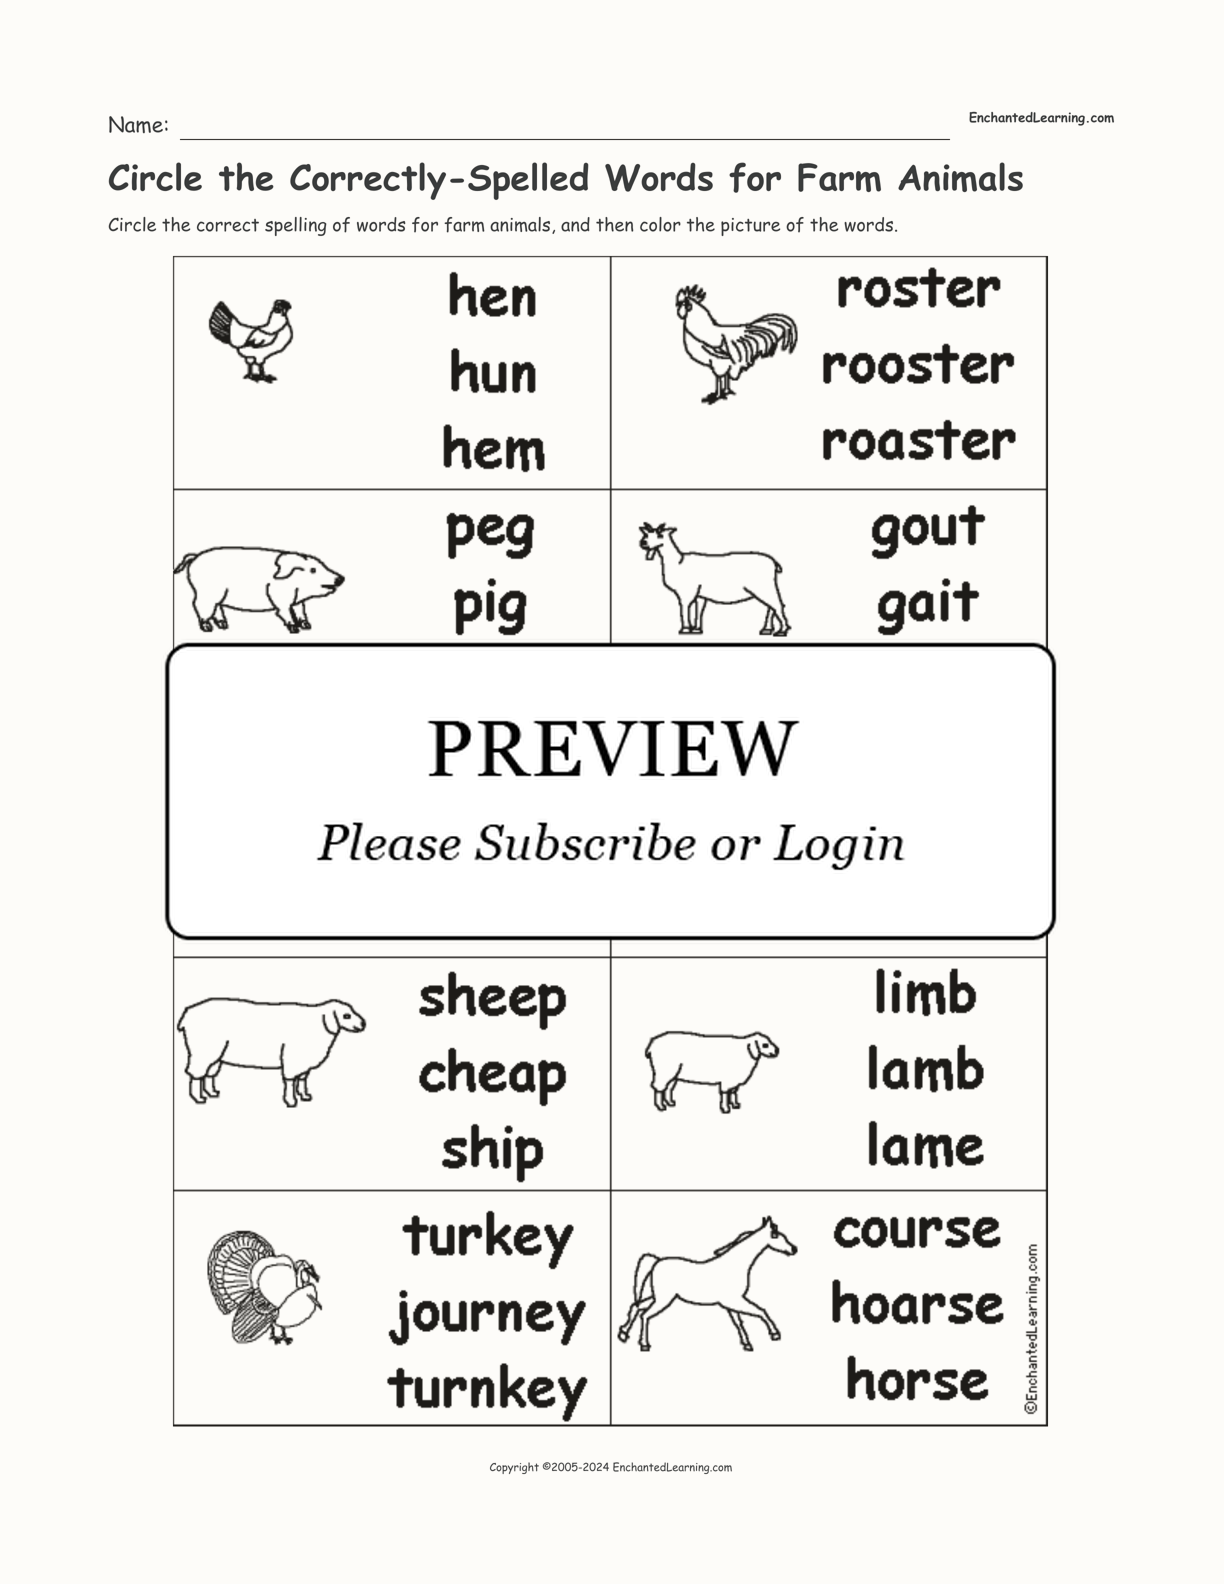 Circle the Correctly-Spelled Words for Farm Animals interactive worksheet page 1